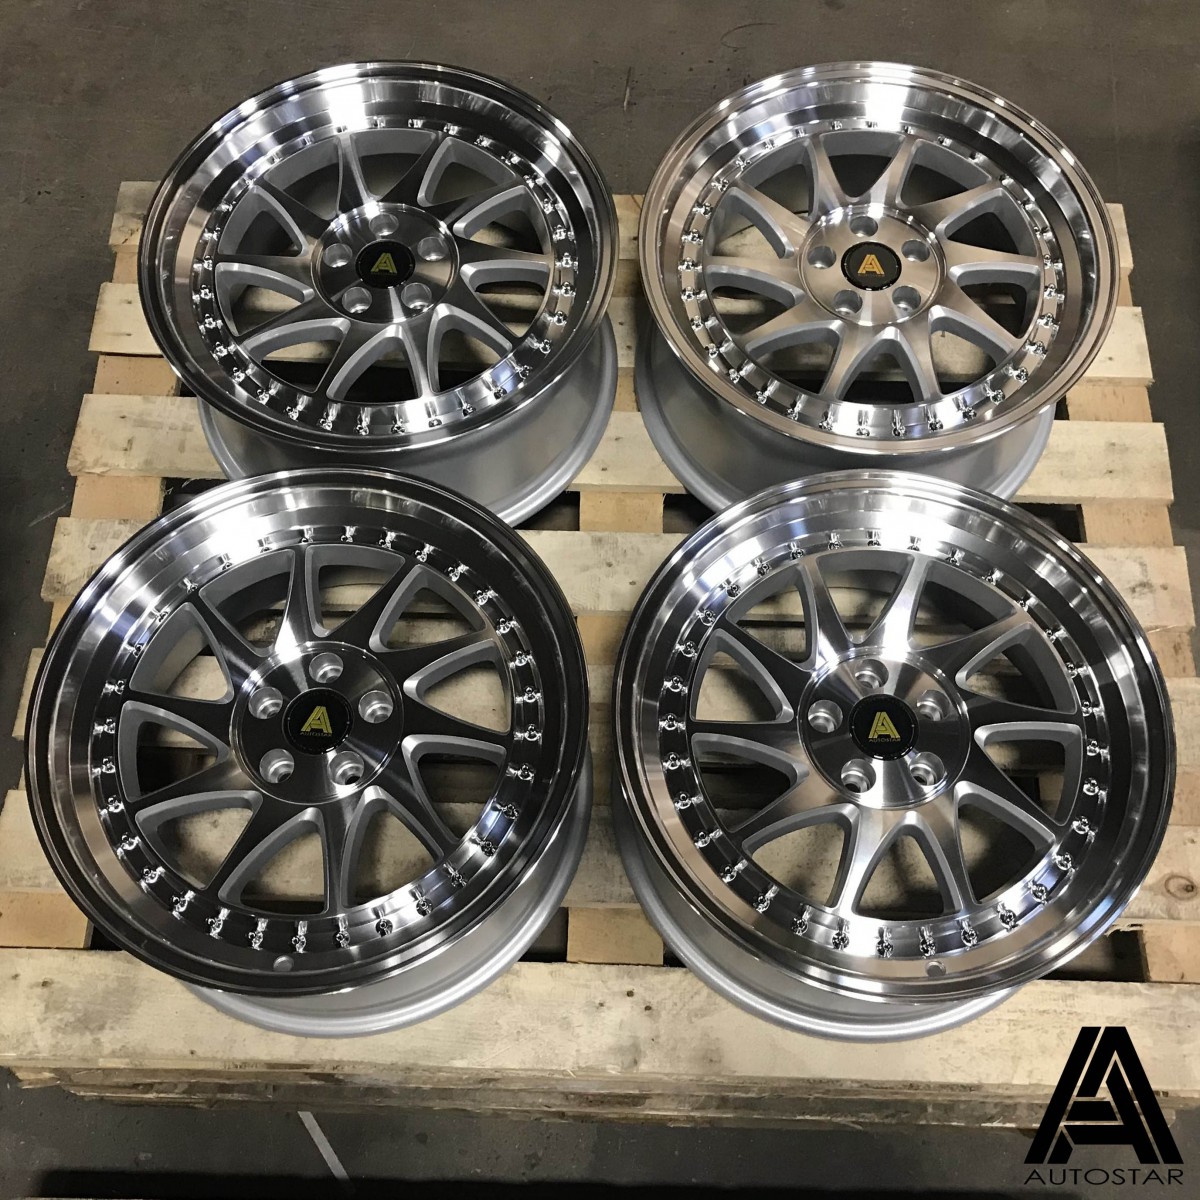 AutoStar Vader 17x8 5x100 ET30 Silver with Machined Face and Polished Lip - Set of 4